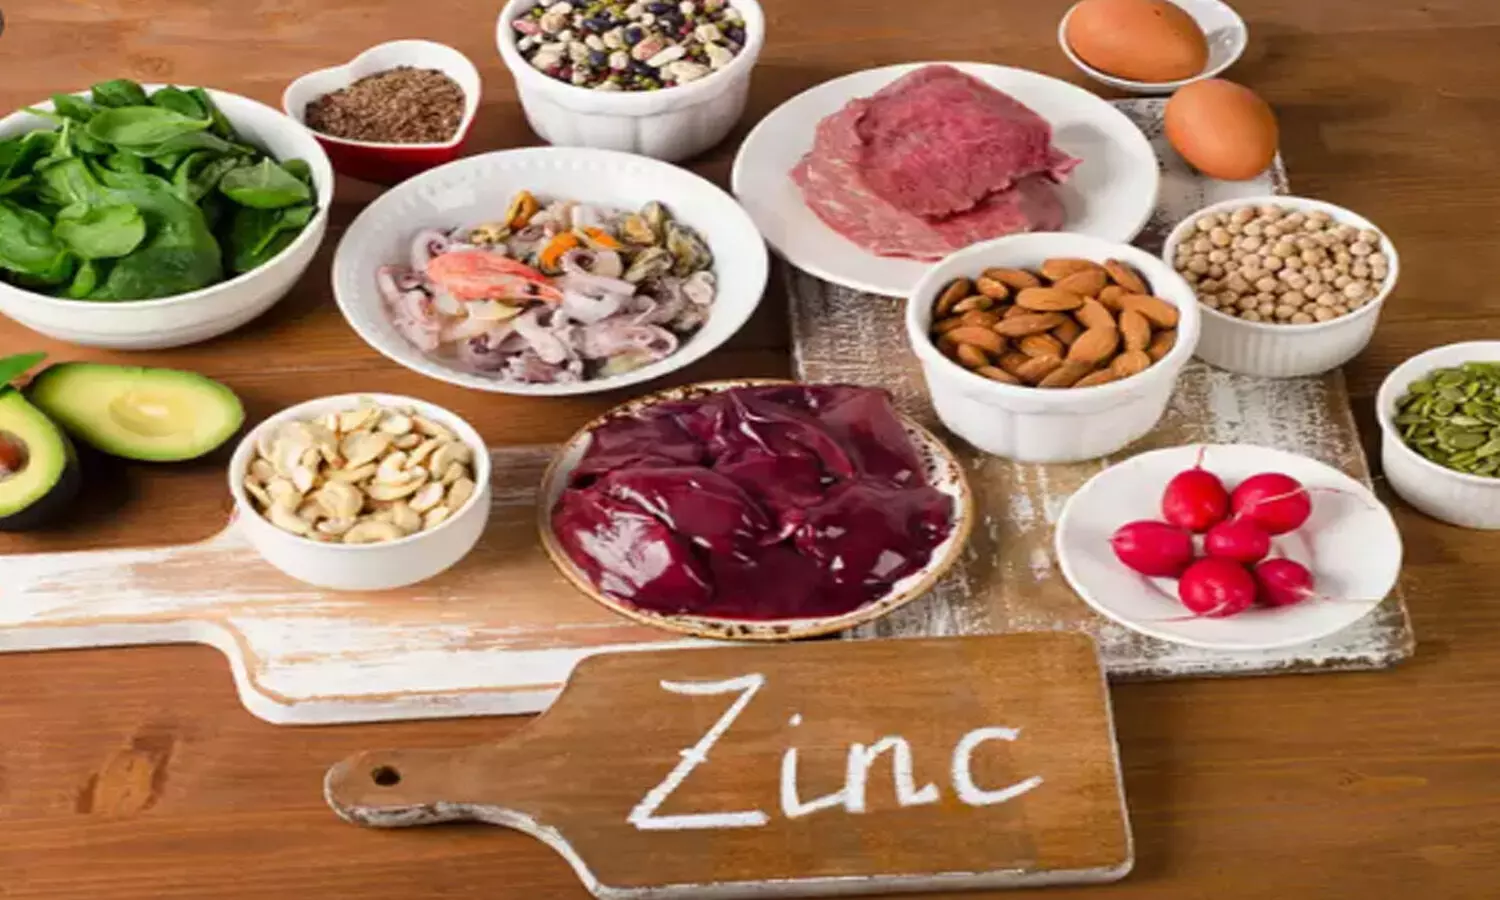 With Vitamin C & D, Zinc also plays important role in boosting immunity; Know How!